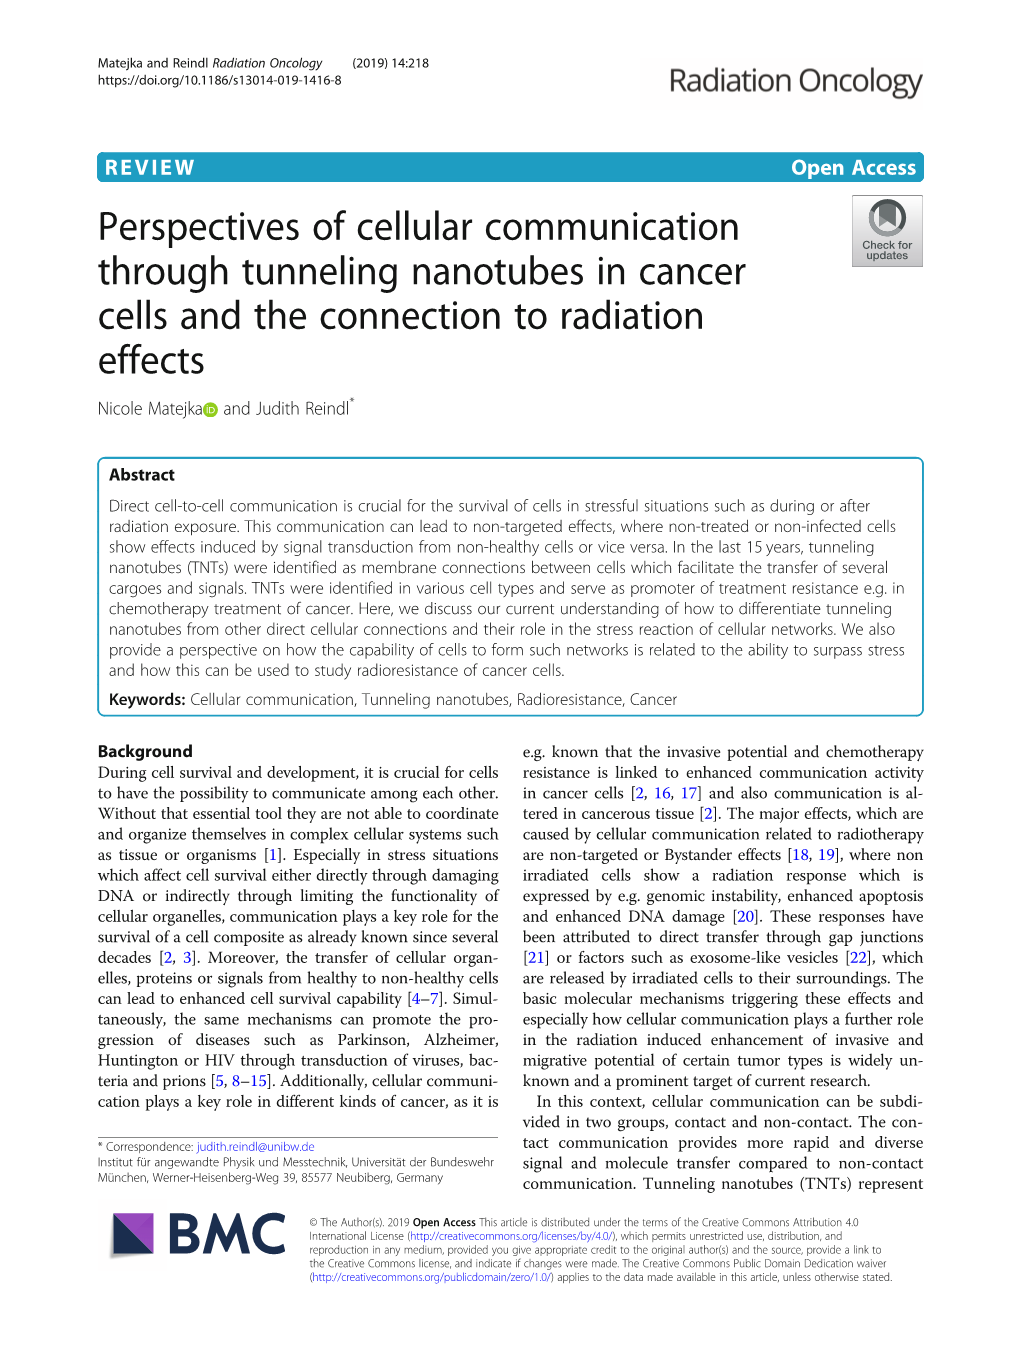 Perspectives of Cellular Communication Through Tunneling Nanotubes in Cancer Cells and the Connection to Radiation Effects Nicole Matejka and Judith Reindl*